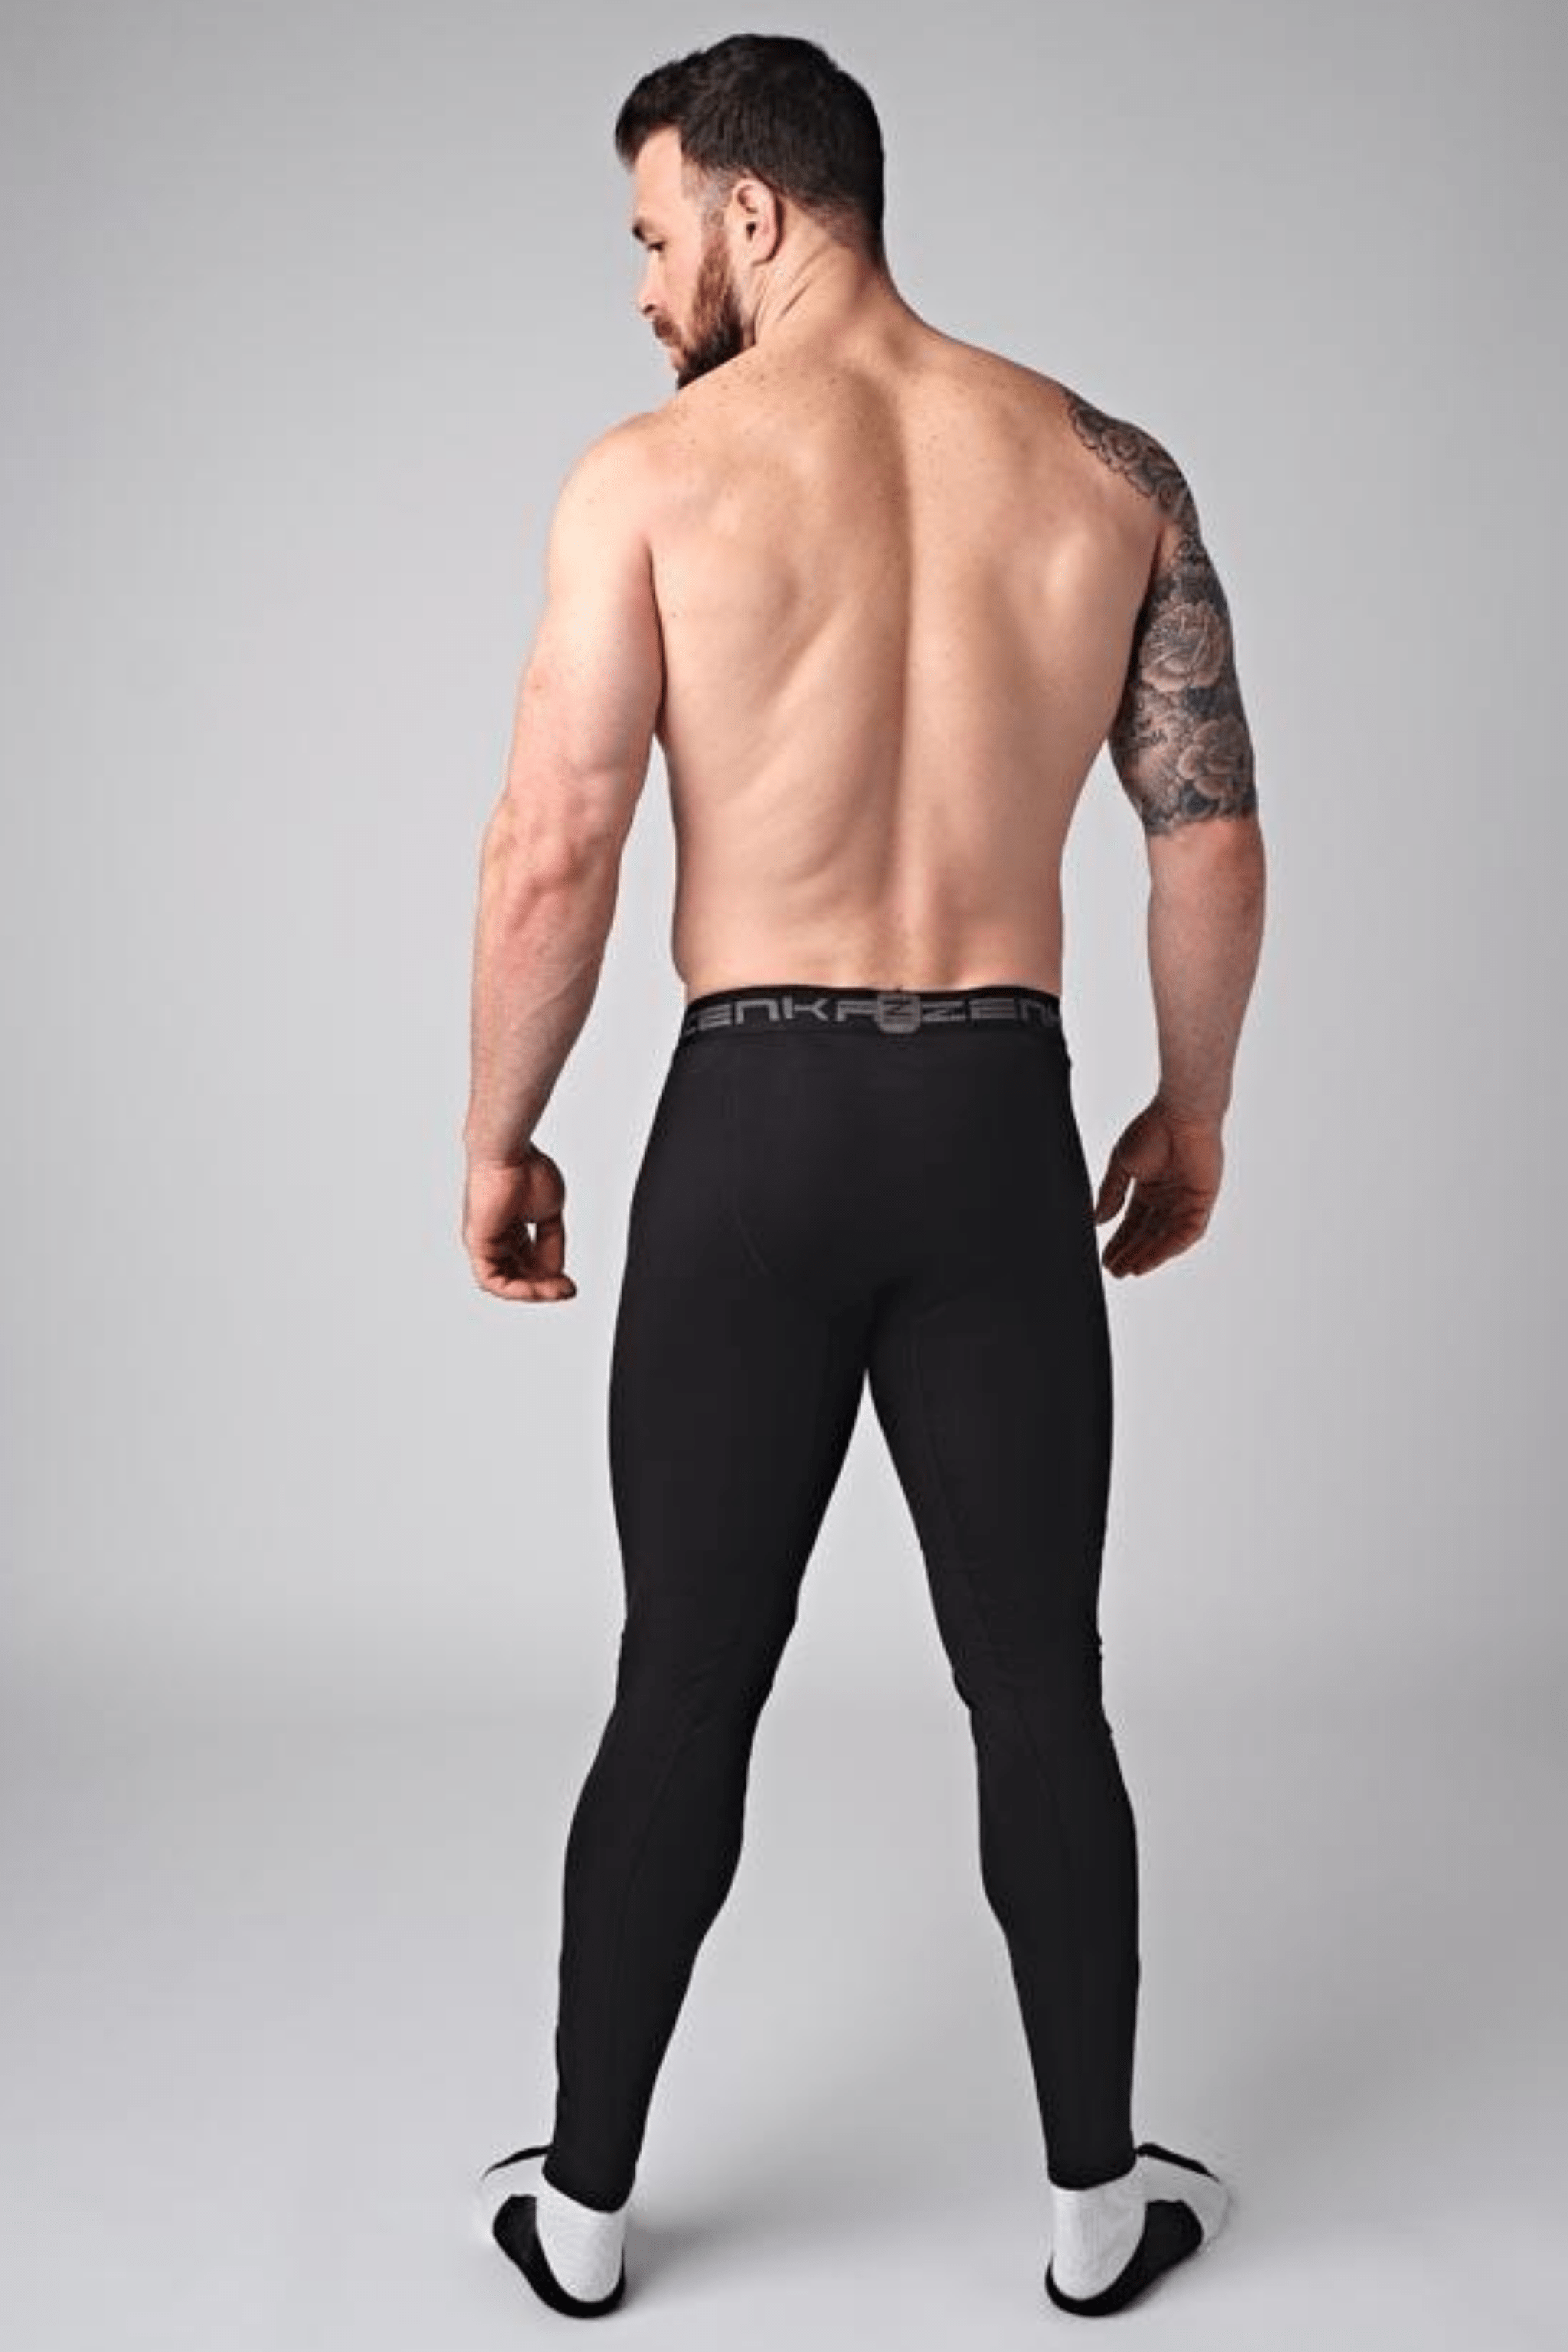 Men's Cotton Compression Leggings Cool Dry Baselayer Tights